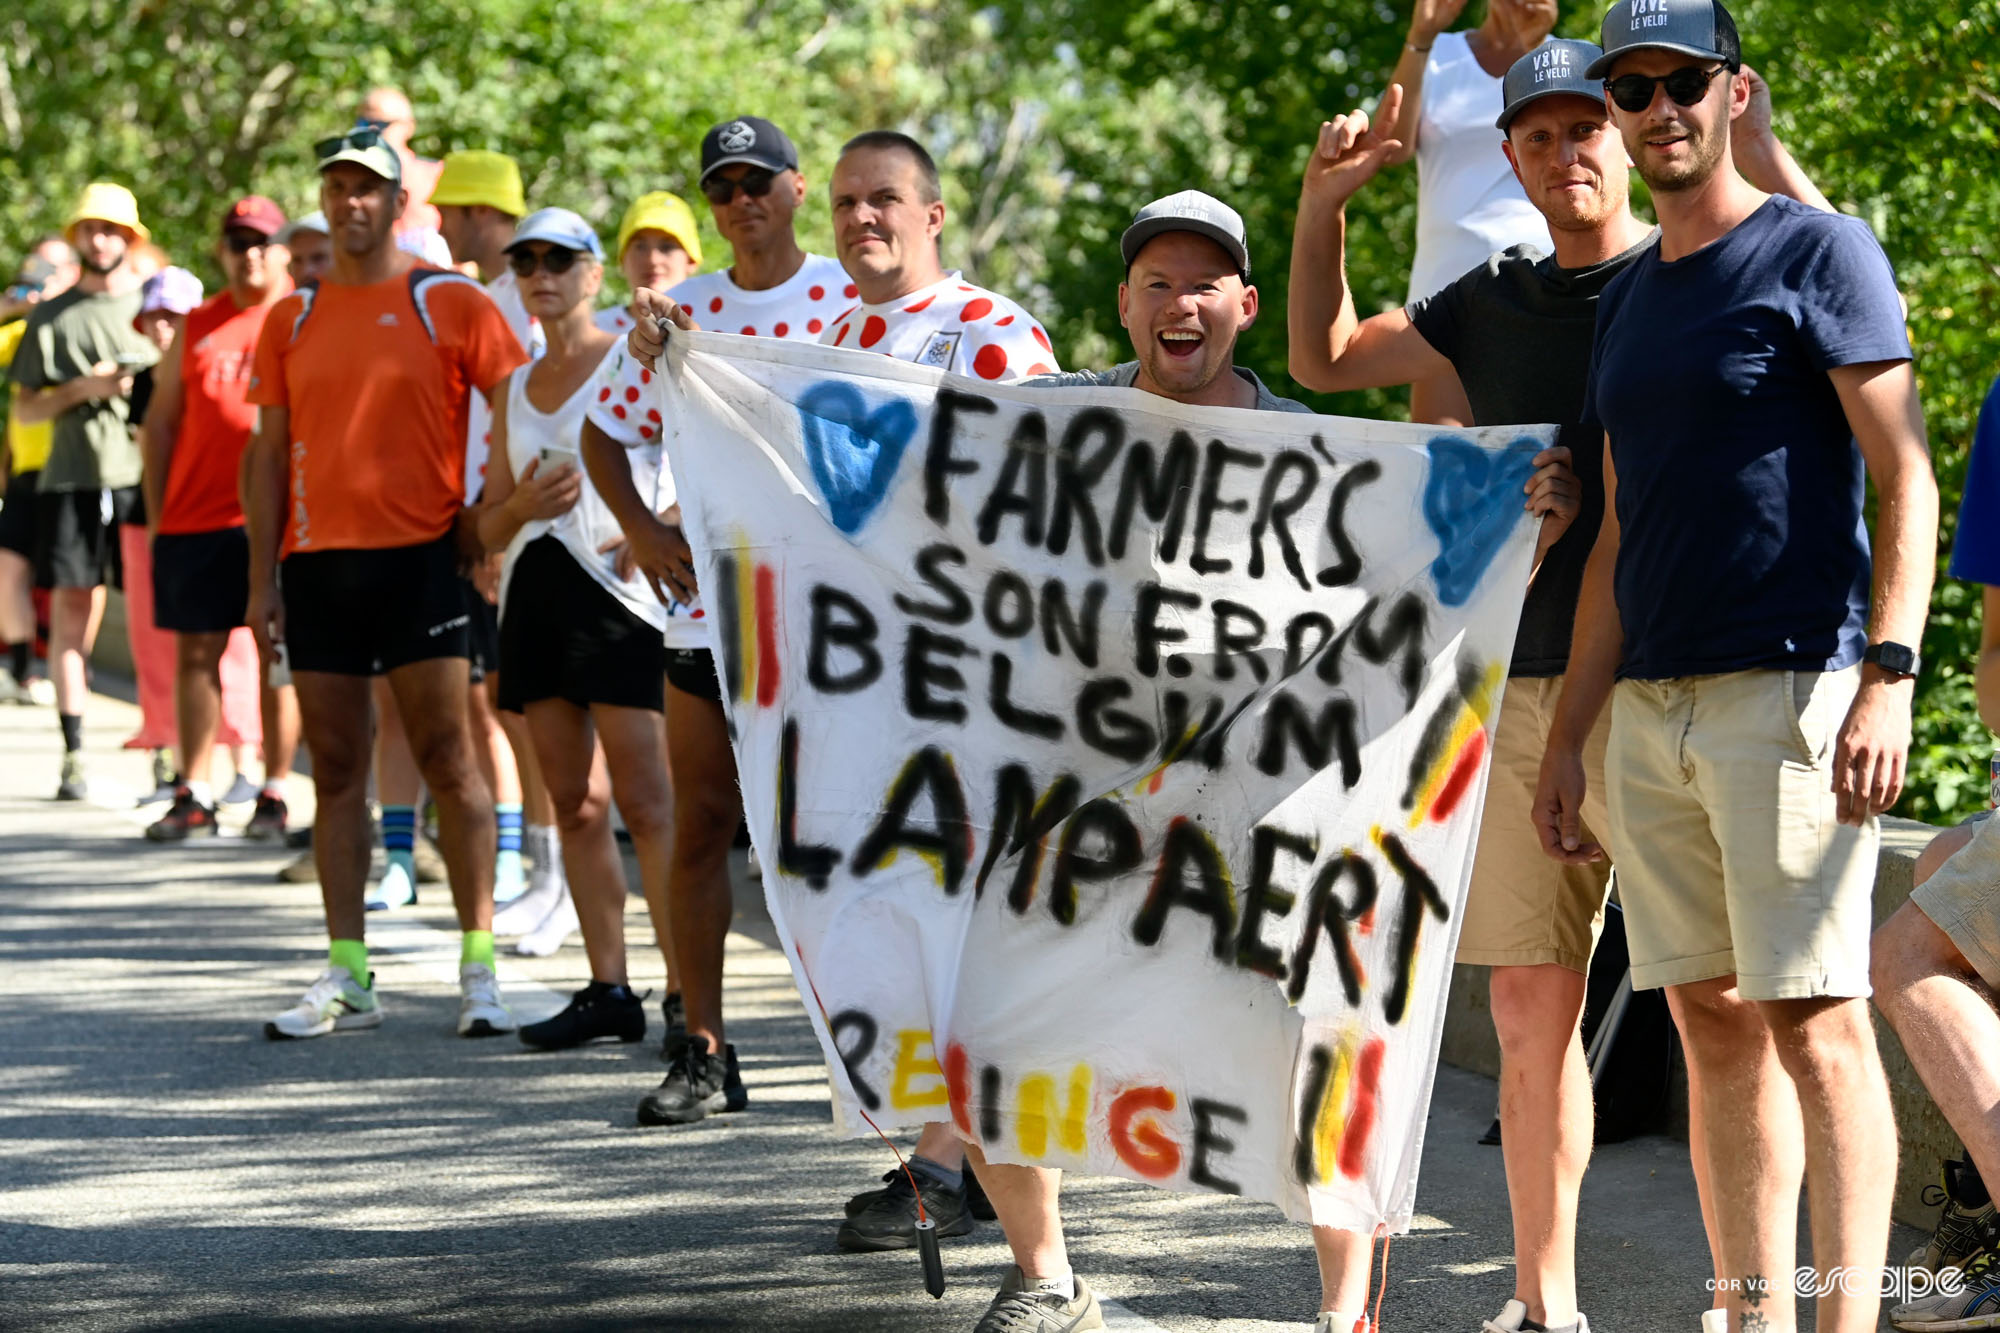 Fans stand with signs on the roadside to cheer Yves Lampaert. This one reads "Farmer's son from Belgium" with blue hearts and belgian flags.